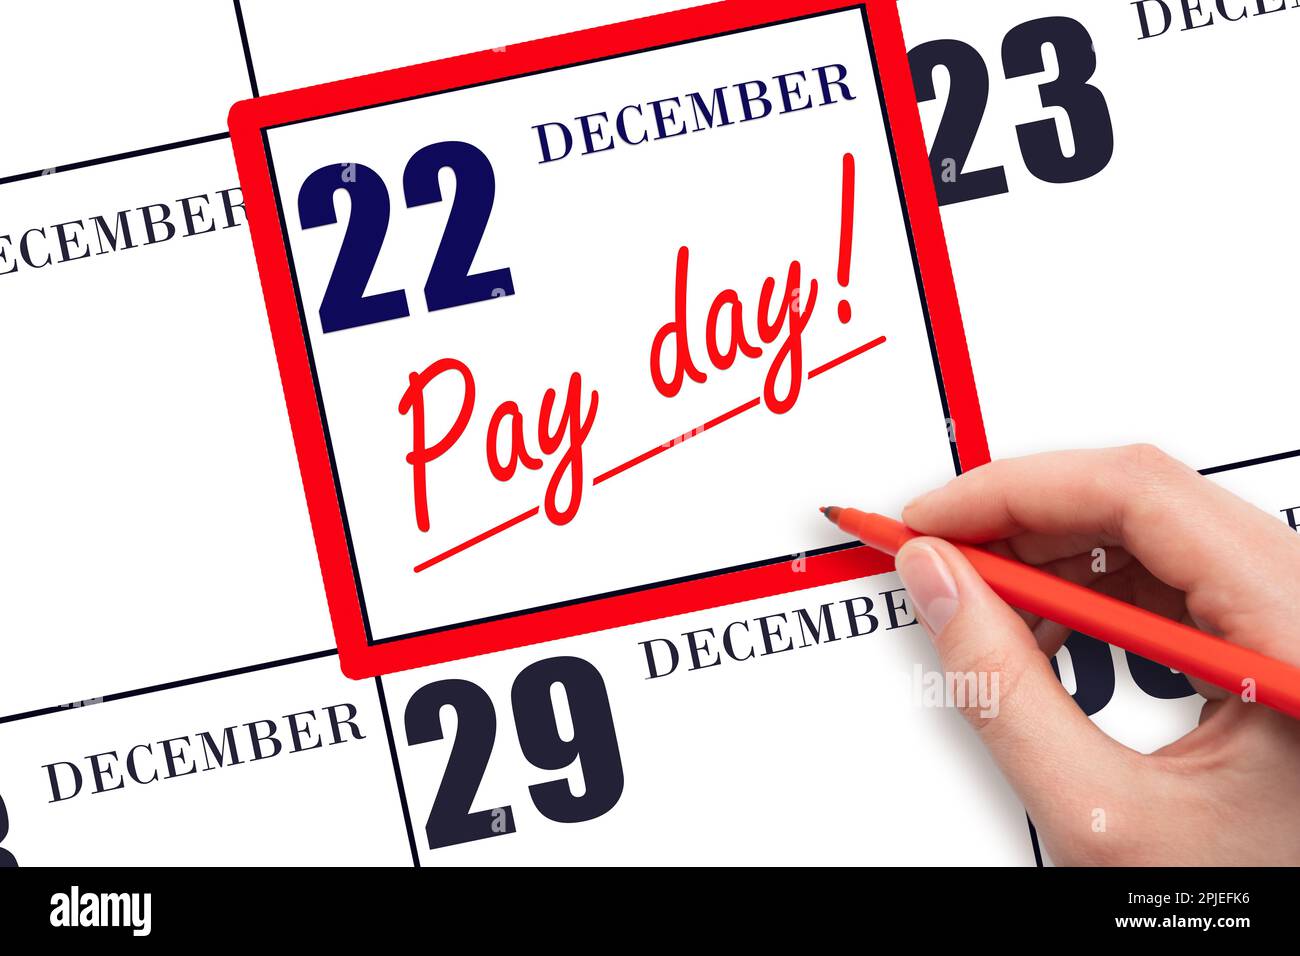 22nd day of December. Hand writing text PAY DATE on calendar date December 22 and underline it. Payment due date. Reminder concept of payment. Winter Stock Photo